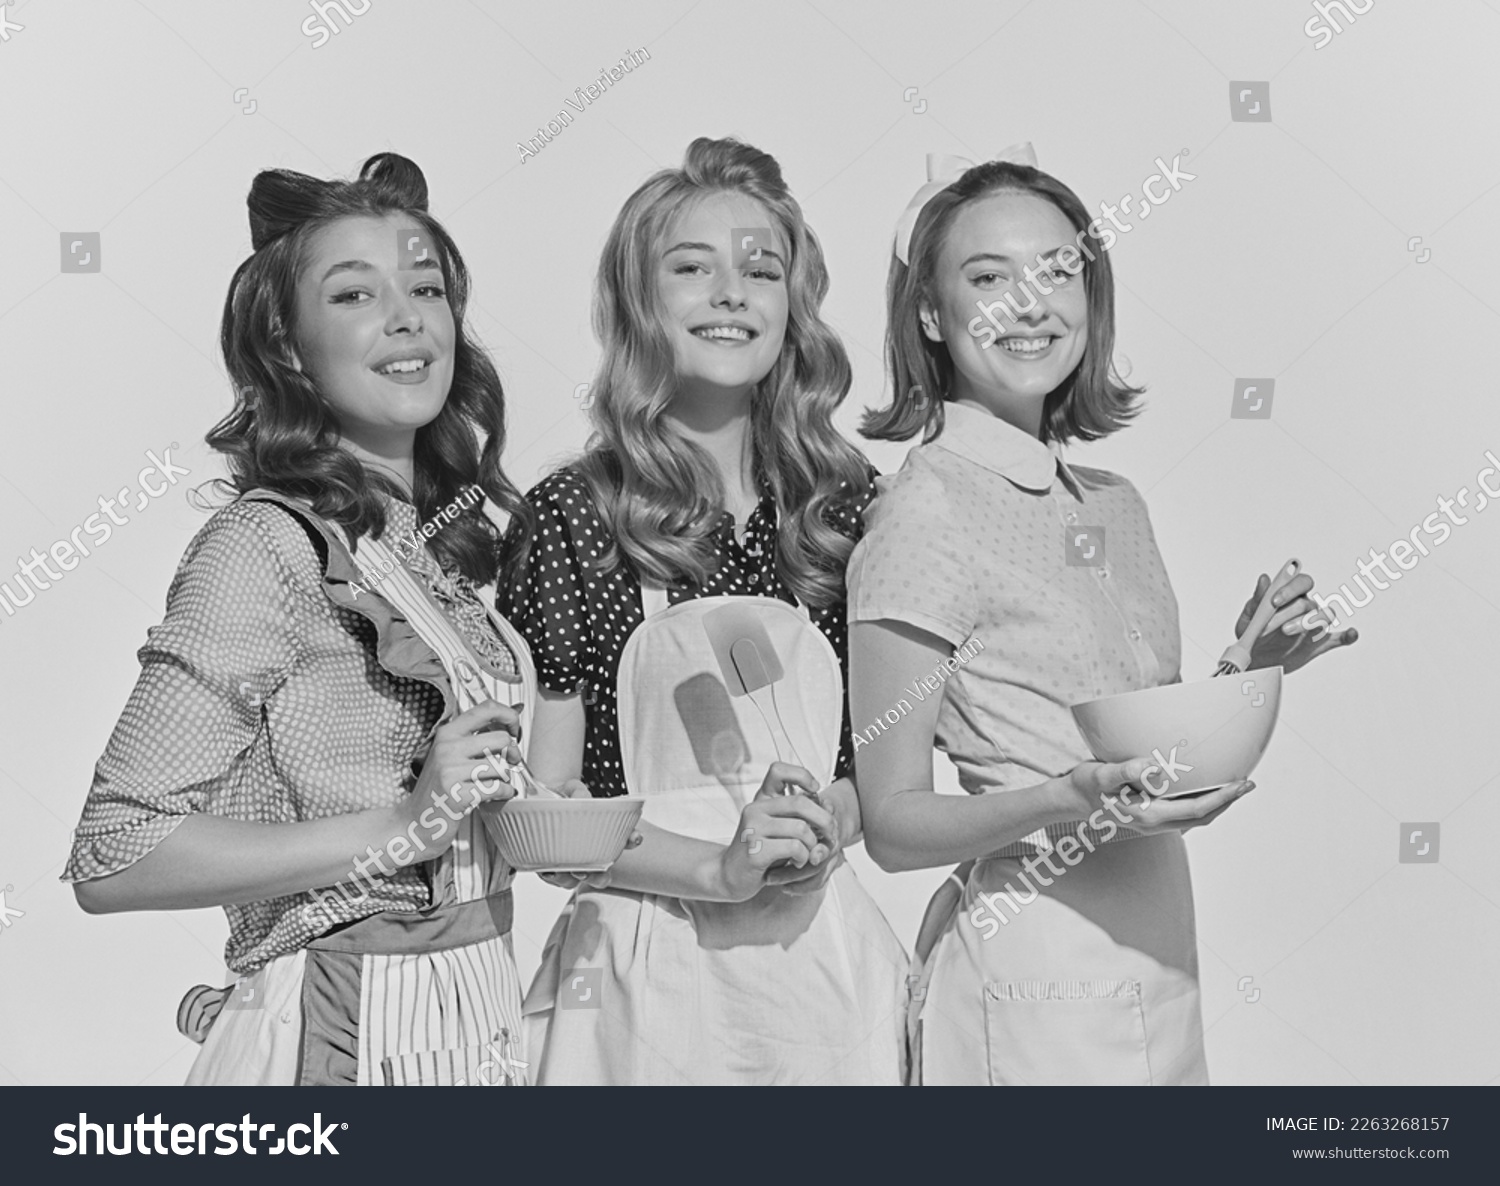 Retro style portrait of beautiful young women, housewives with cooking tools. Black and white image in vintage style. Concept of beauty, retro style, fashion, elegance, 60s, 70s, family. #2263268157